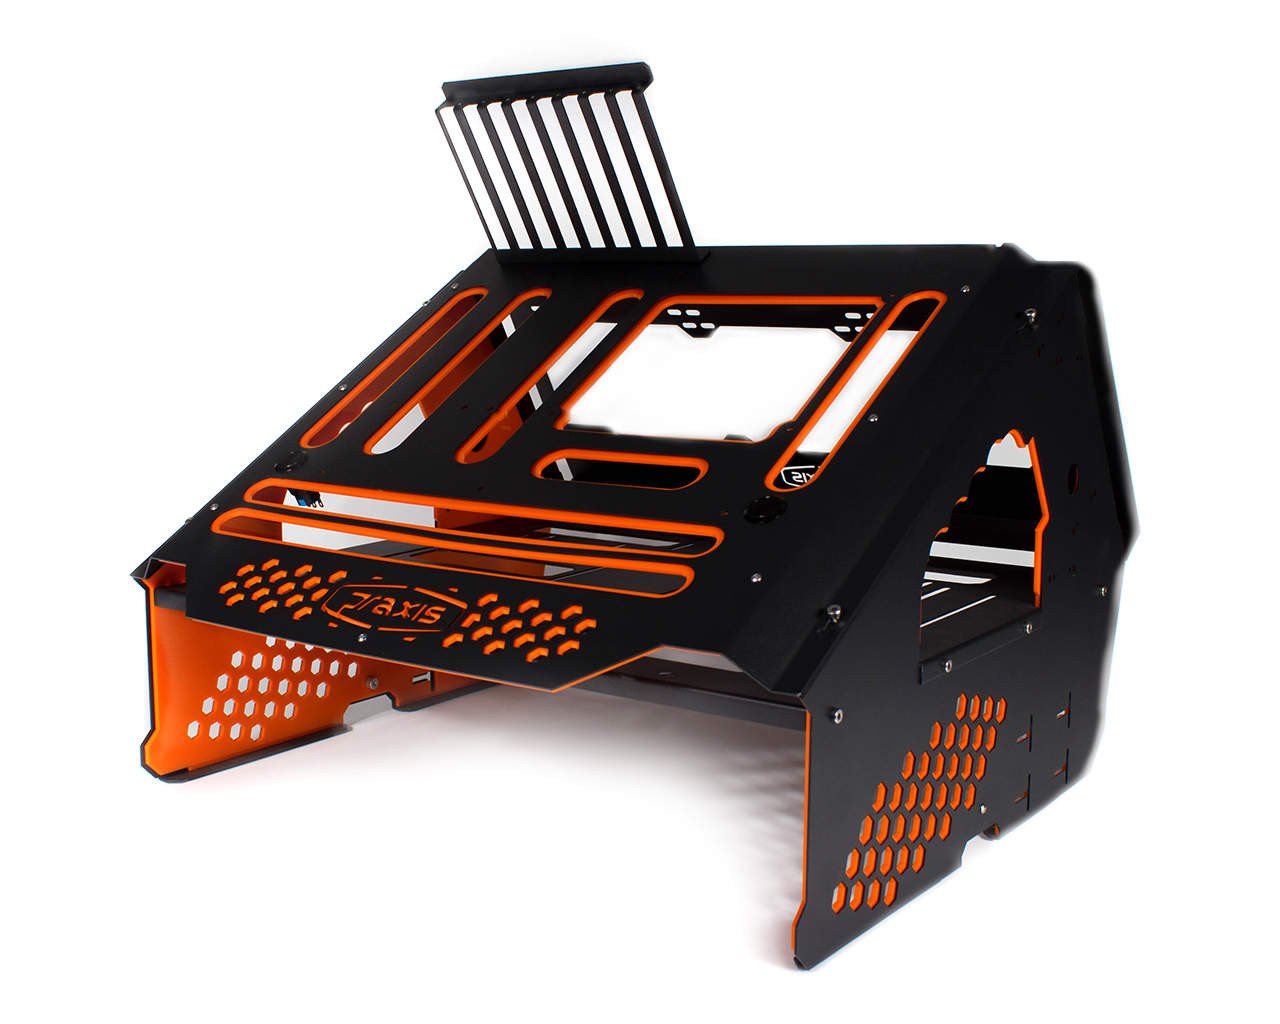 PrimoChill's Praxis Wetbench Powdercoated Steel Modular Open Air Computer Test Bench for Watercooling or Air Cooled Components - PrimoChill - KEEPING IT COOL Black w/ Solid Orange Accents